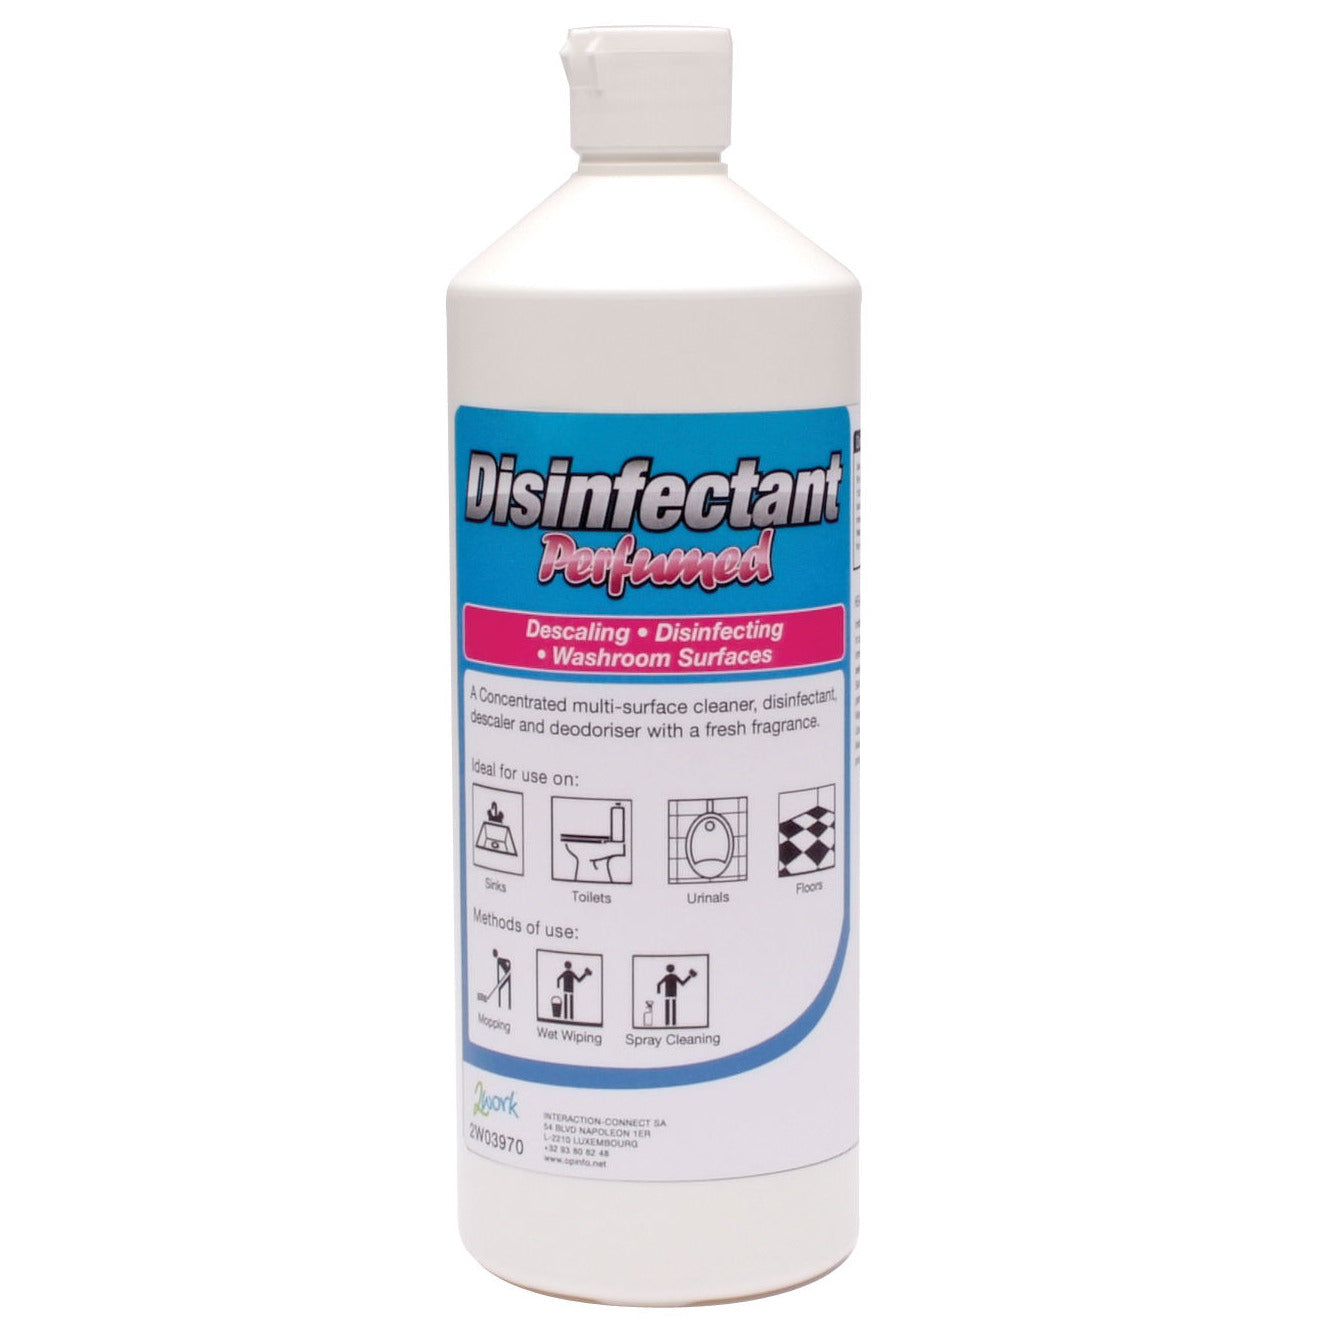 Select Disinfectant Perfumed 1 Litre